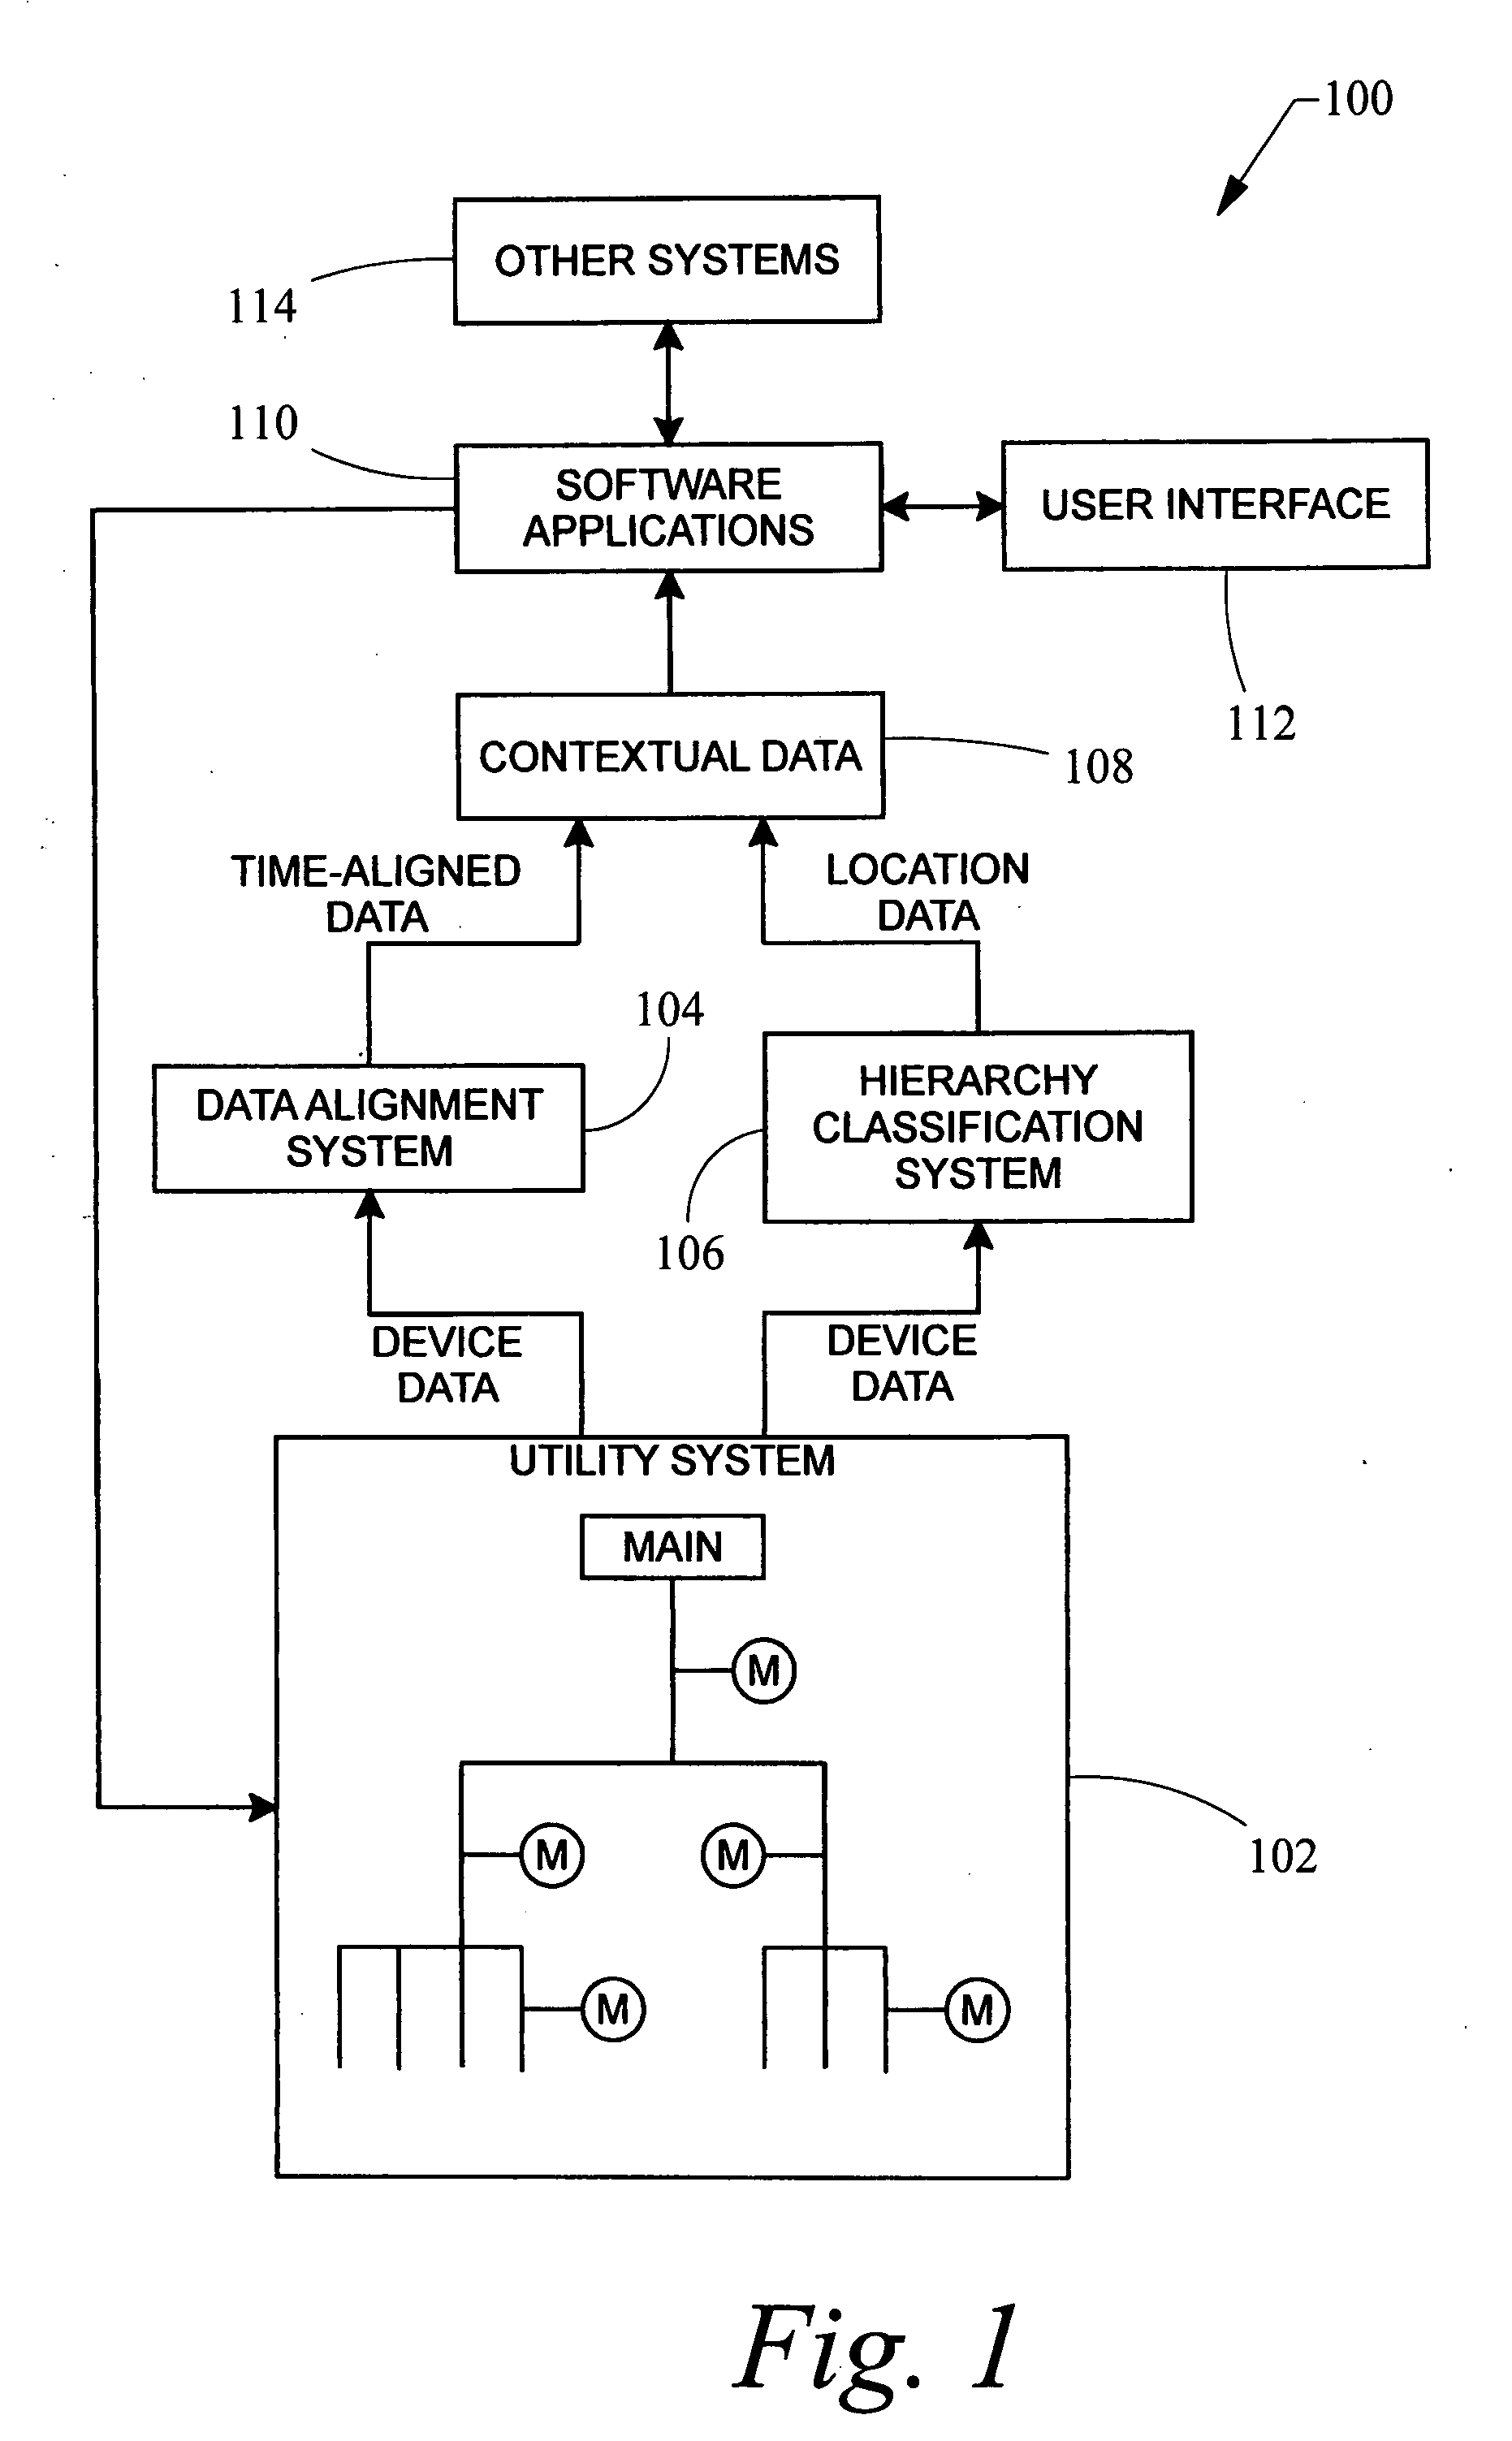 Automated system approach to analyzing harmonic distortion in an electric power system